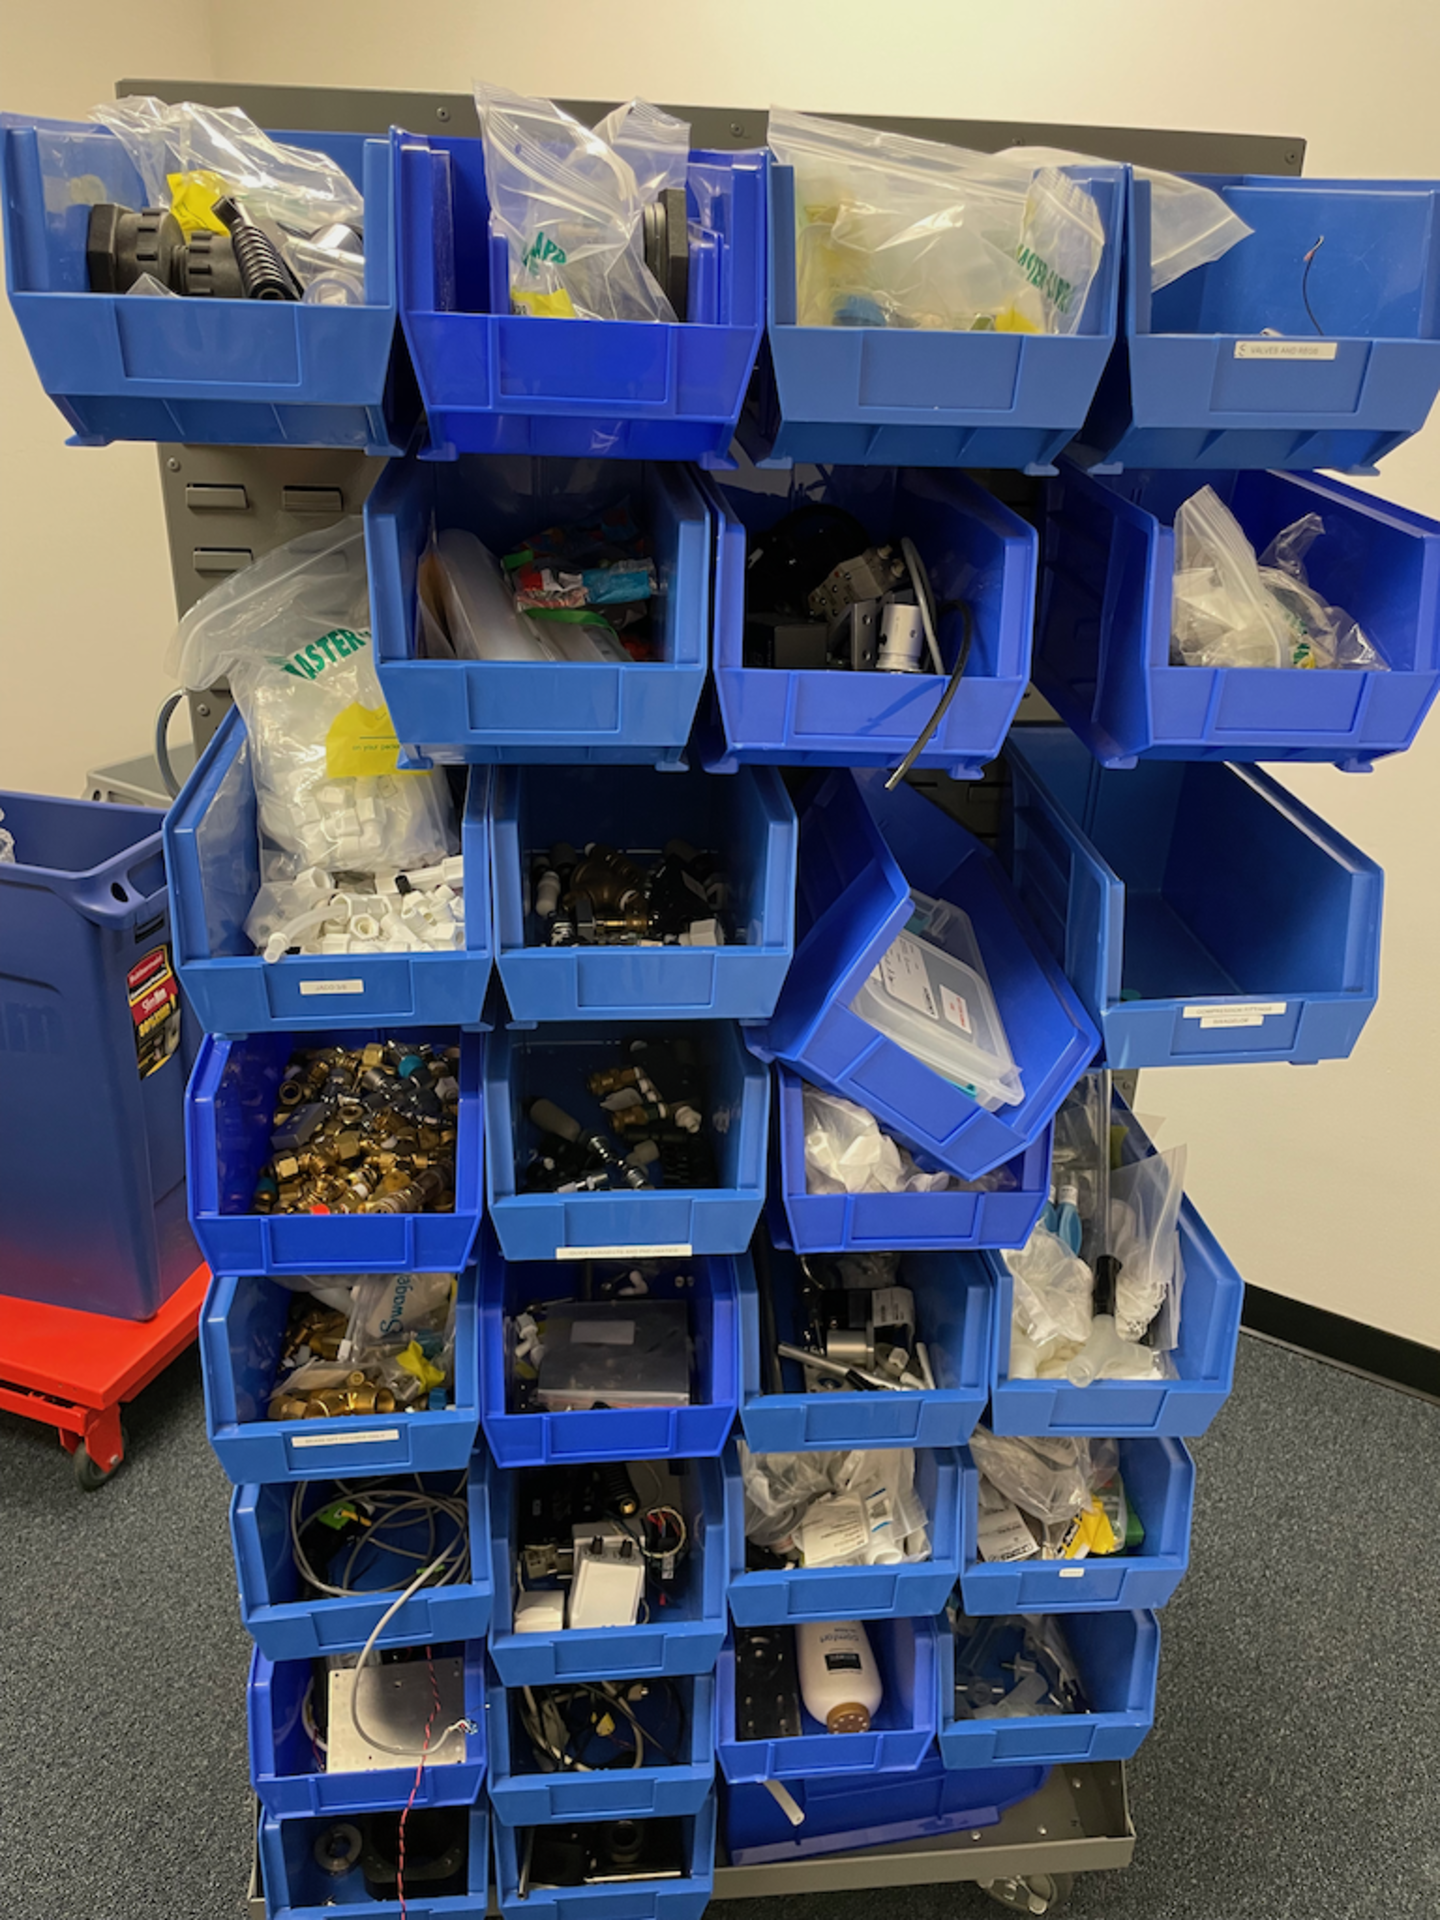 PORTABLE ULINE PARTS RACK WITH CONTENTS OF BLUE TOTES - Image 18 of 22